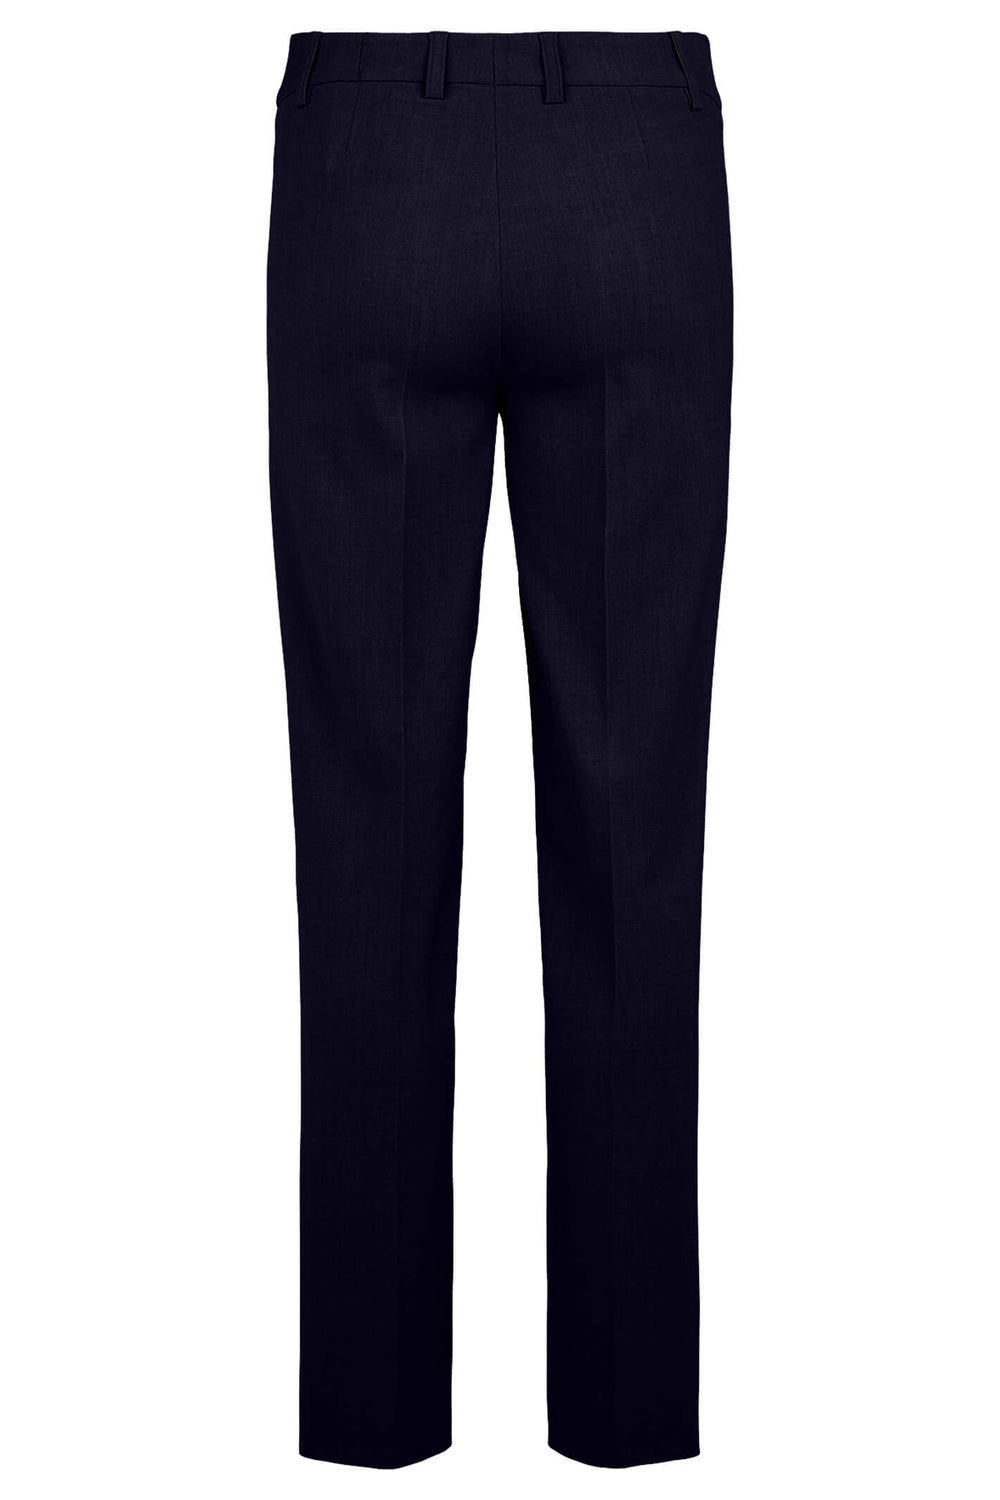 Robell 51452-5405-69 Sissi Navy 75cm Trousers - Olivia Grace Fashion